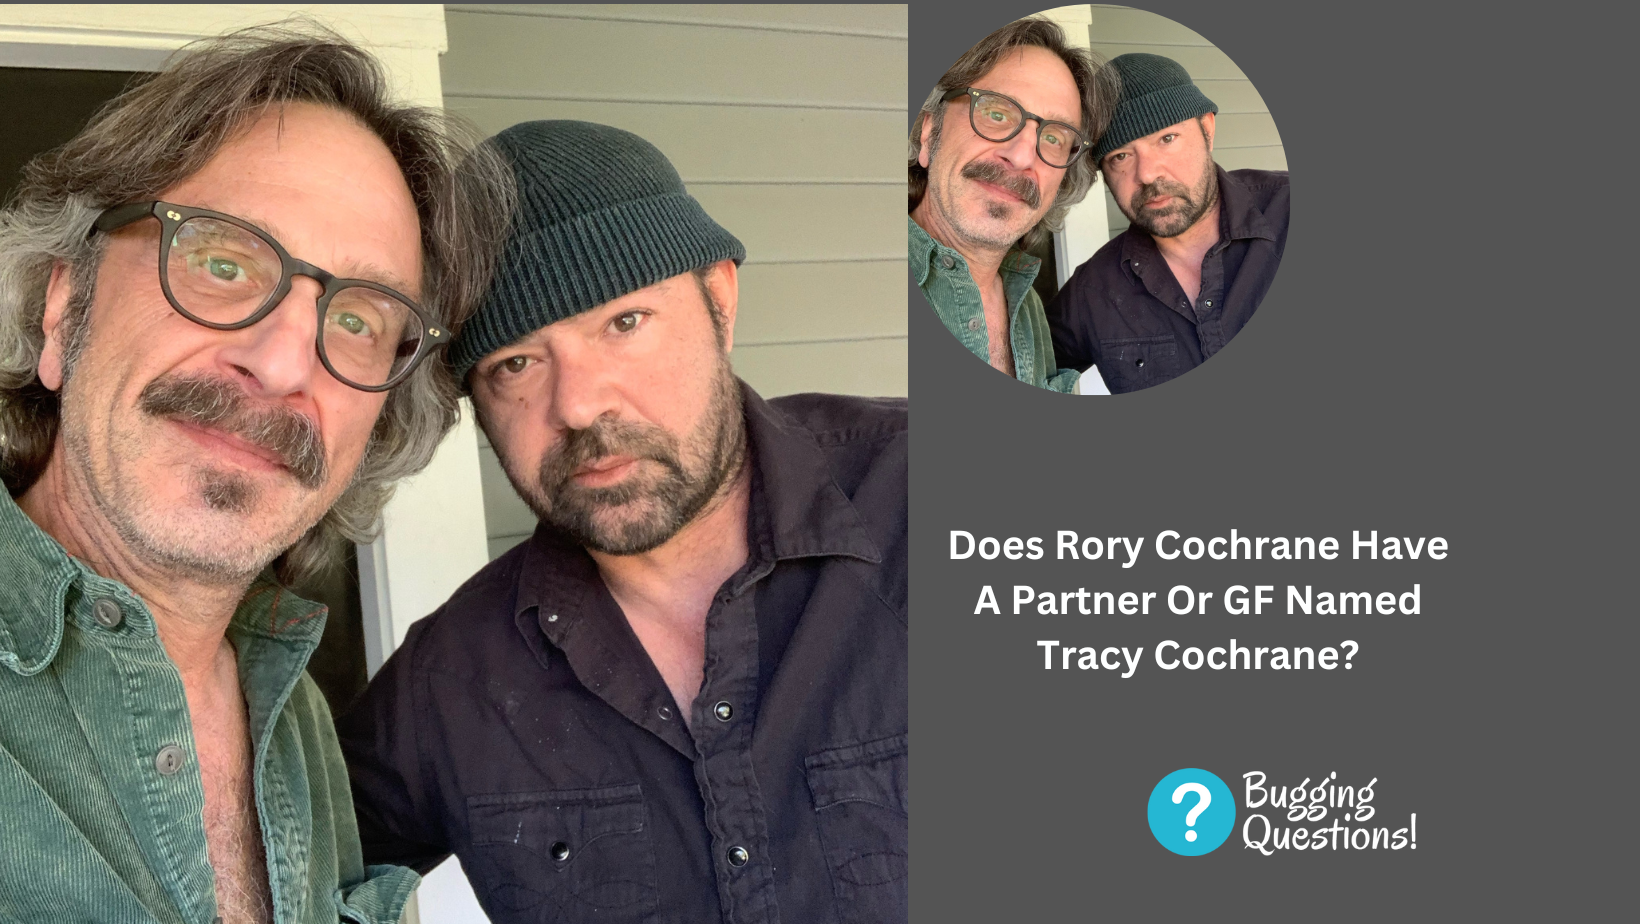 Does Rory Cochrane Have A Partner Or GF Named Tracy Cochrane?